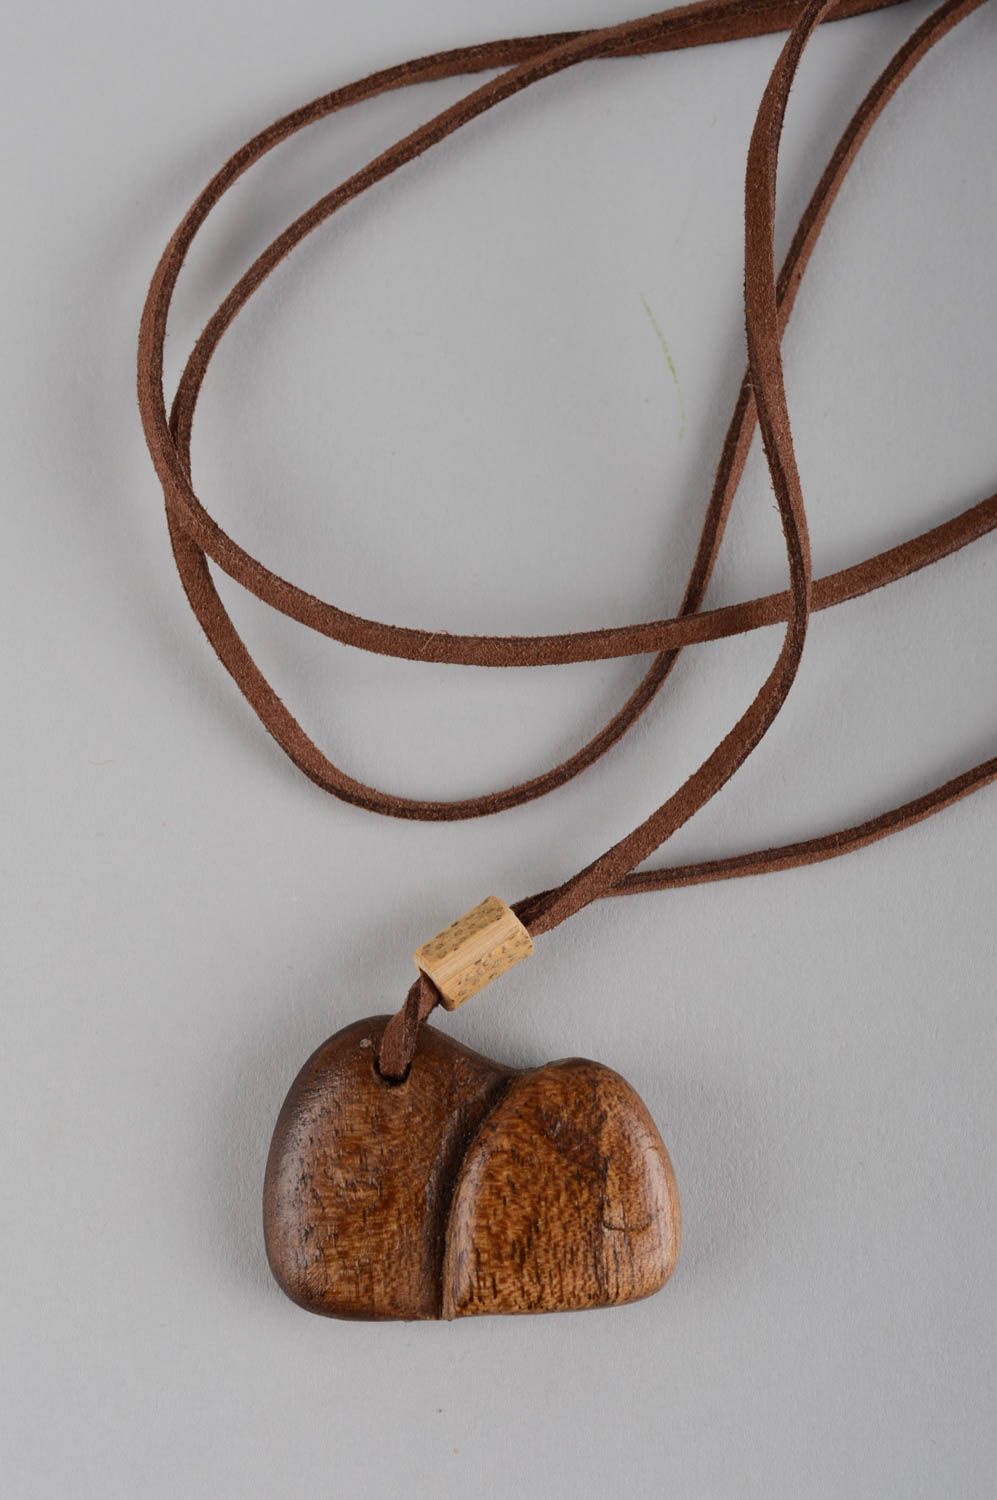 Unusual handmade wooden pendant costume jewelry designs wood craft small gifts photo 7